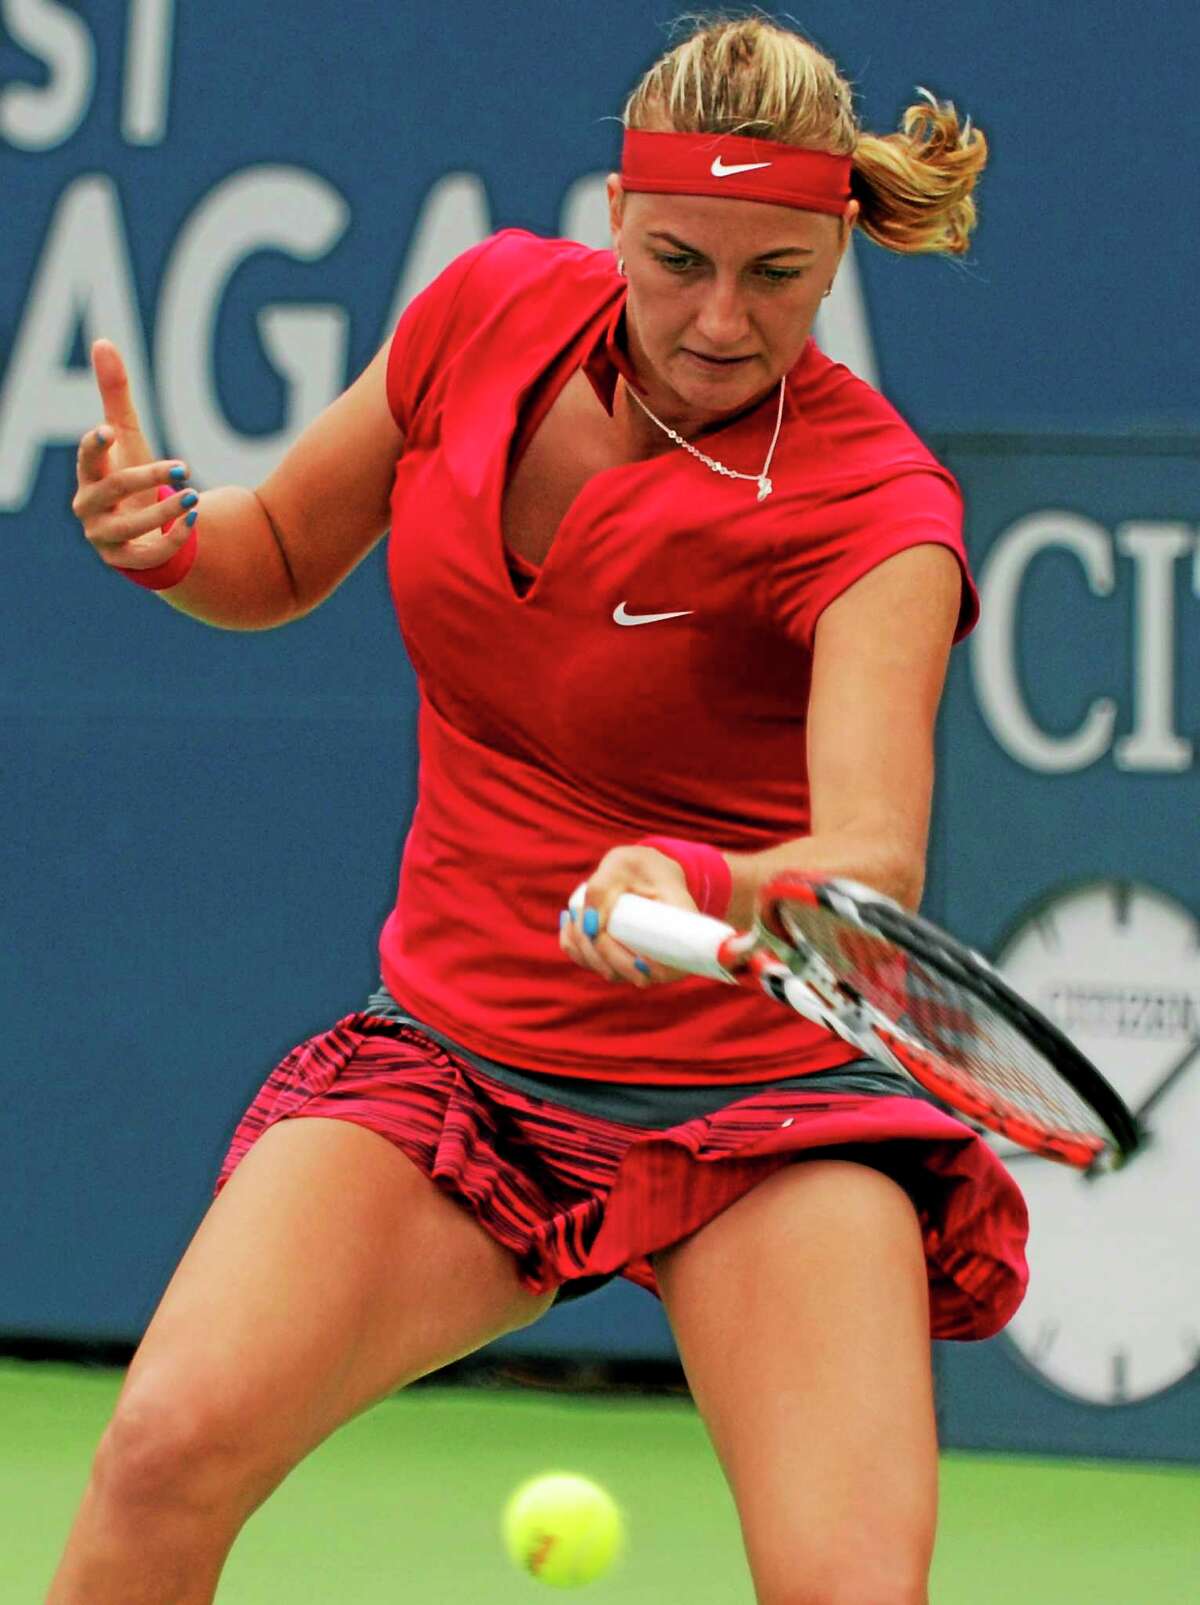 No. 2 seed Petra Kvitova advanced to the semifinals of the Connecticut Open with a 6-4, 6-1 win over Barbora Zahlavova Strycova on Thursday afternoon at the Connecticut Tennis Center.